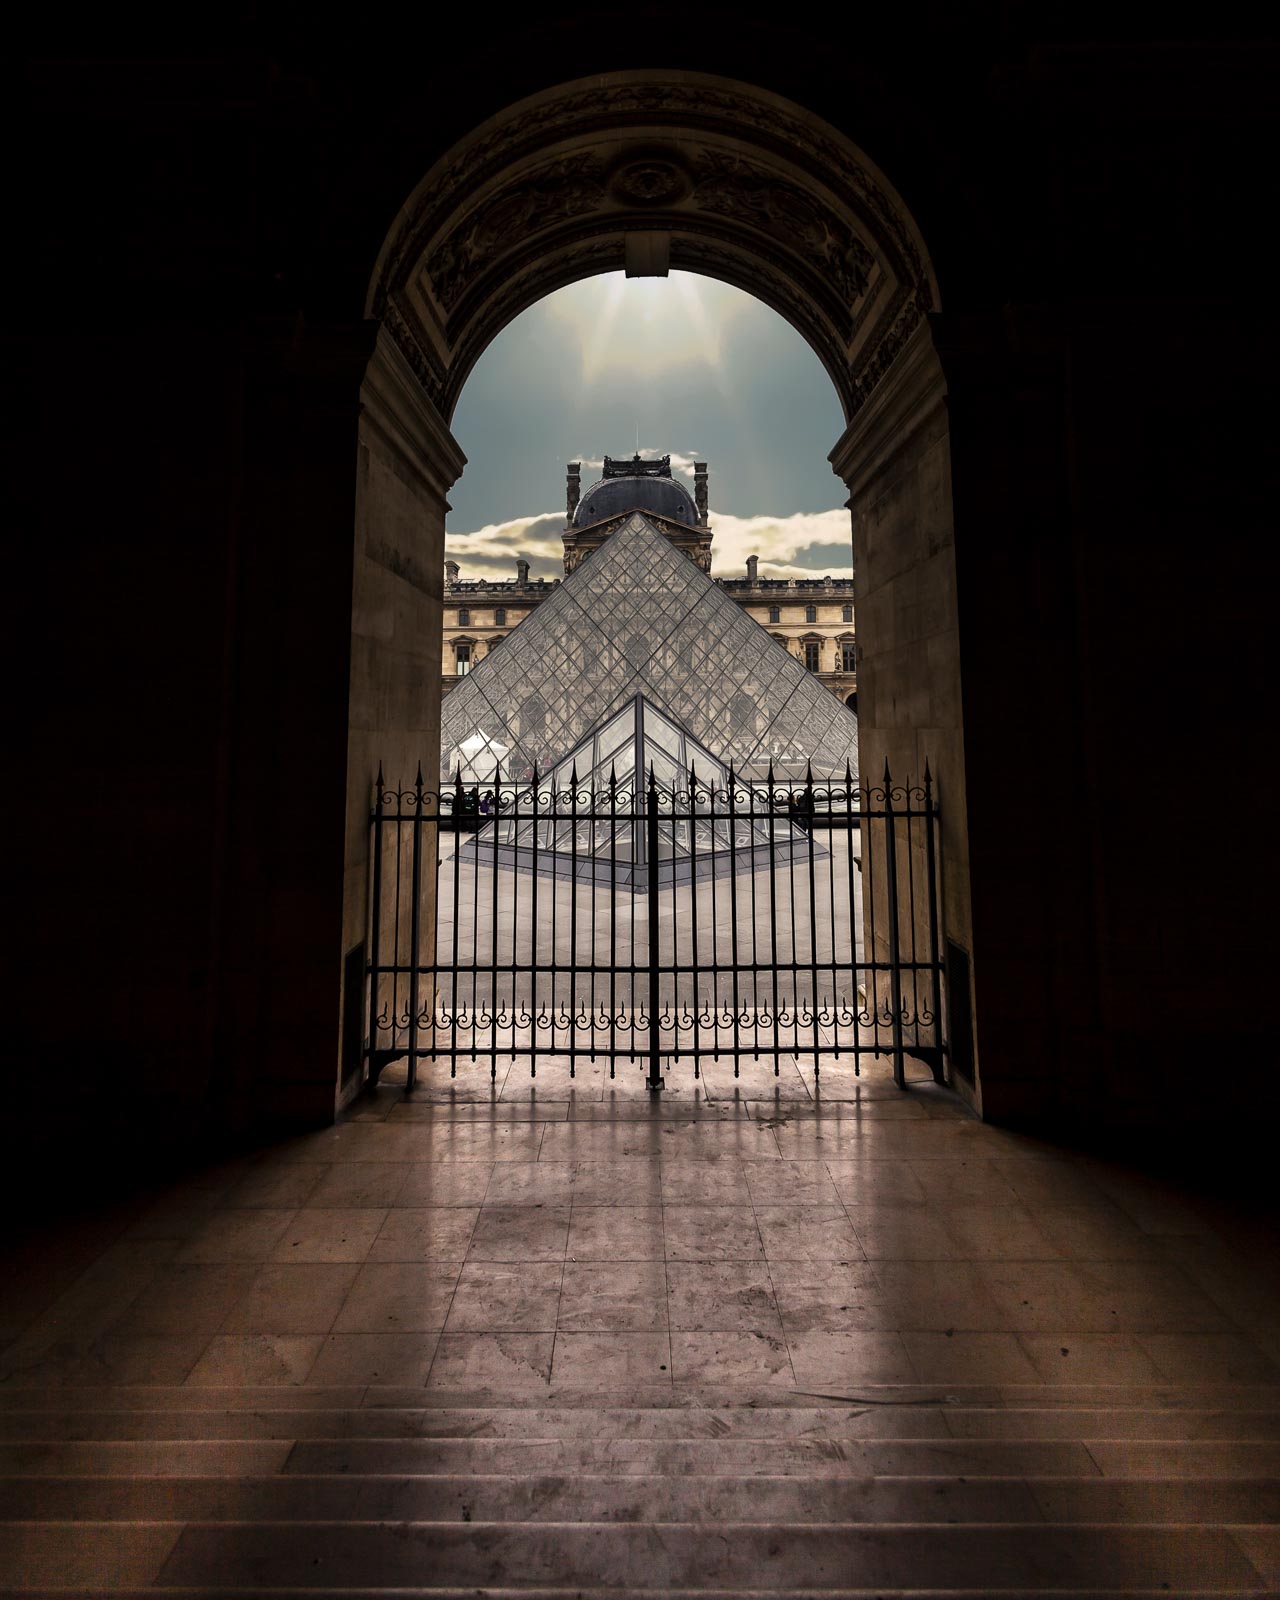 The Louvre in France